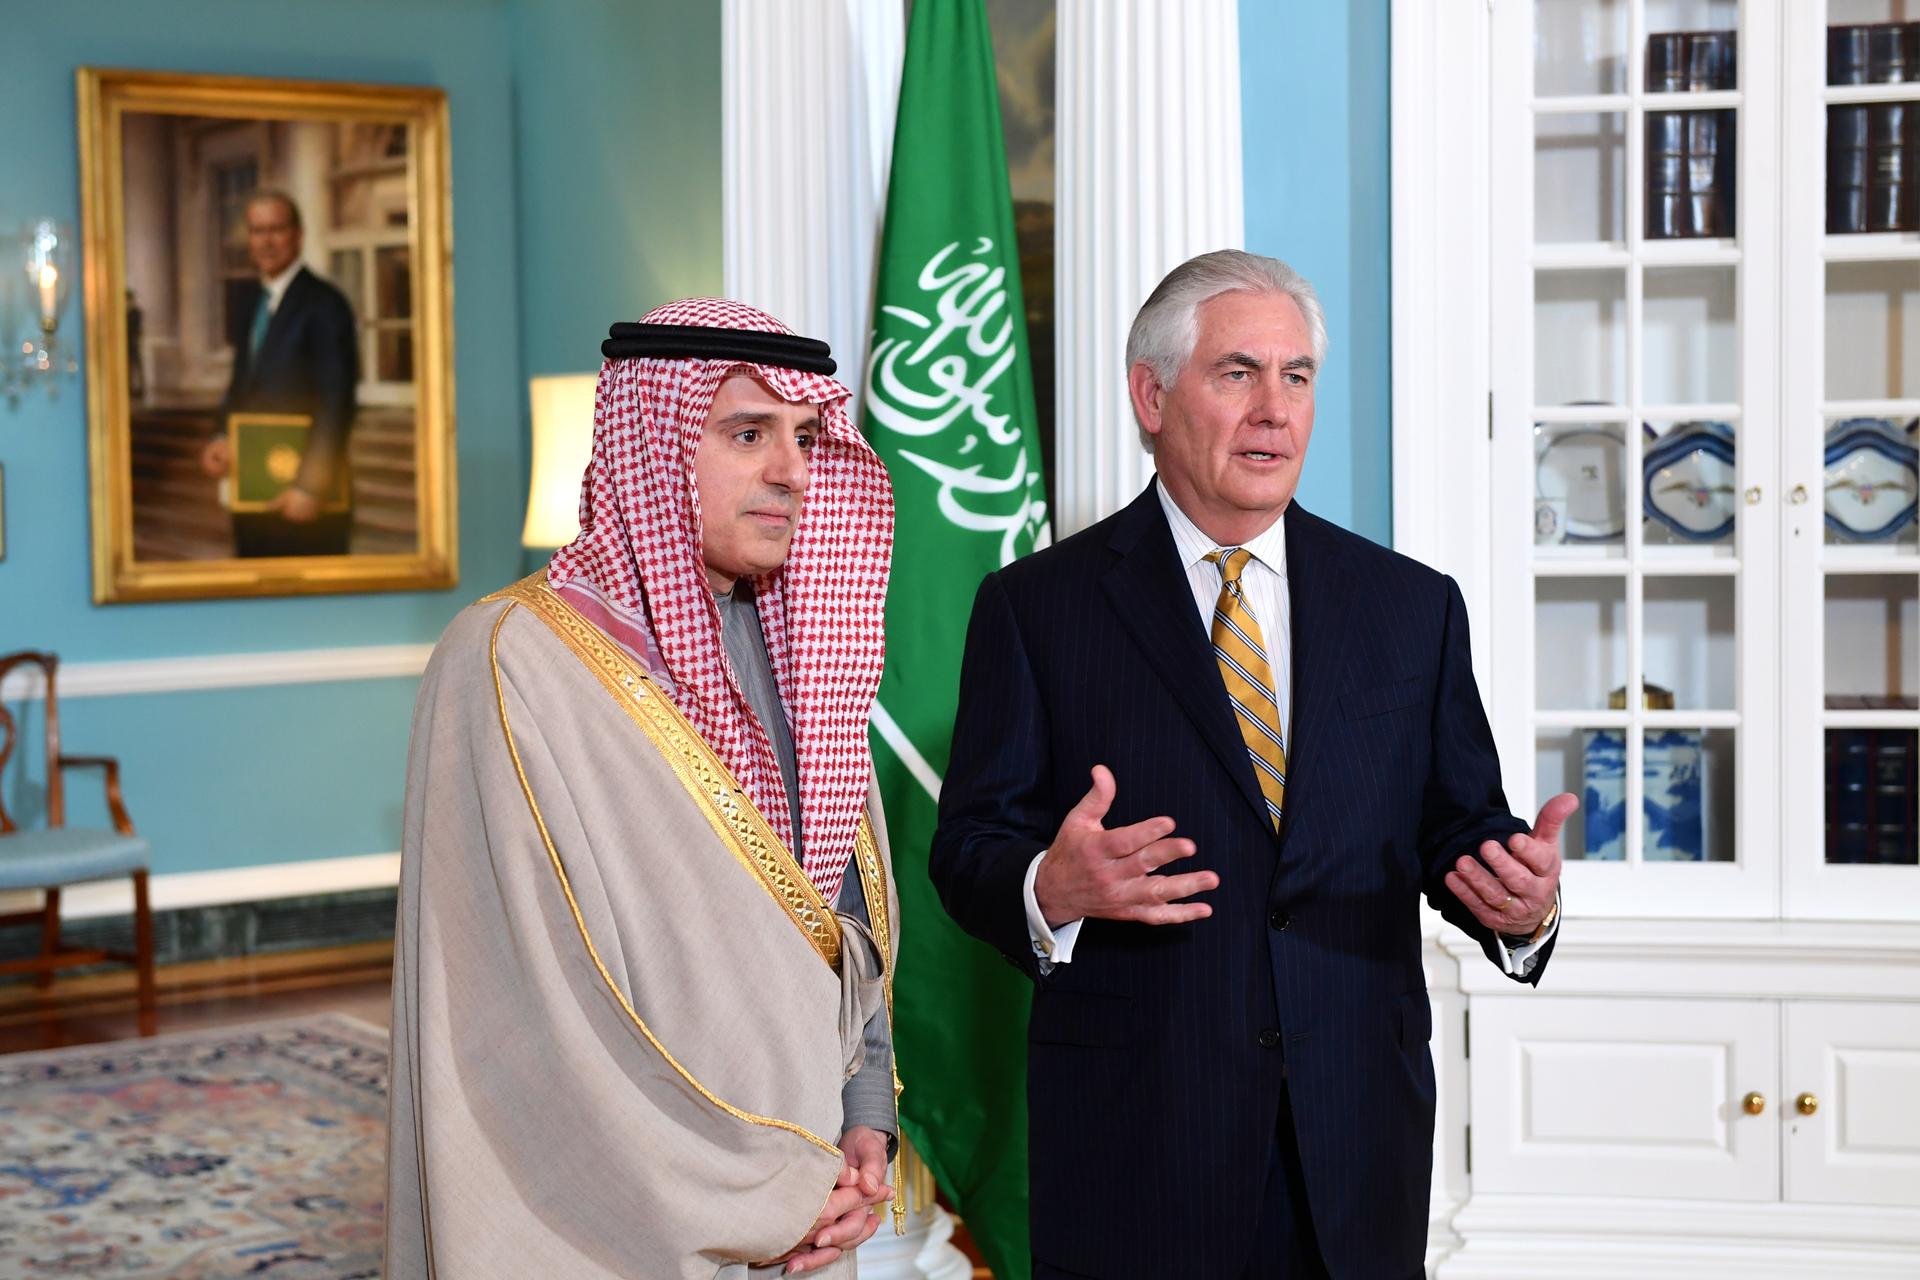 U.S. Secretary of State Rex Tillerson and Saudi Foreign Minister Adel Al-Jubeir